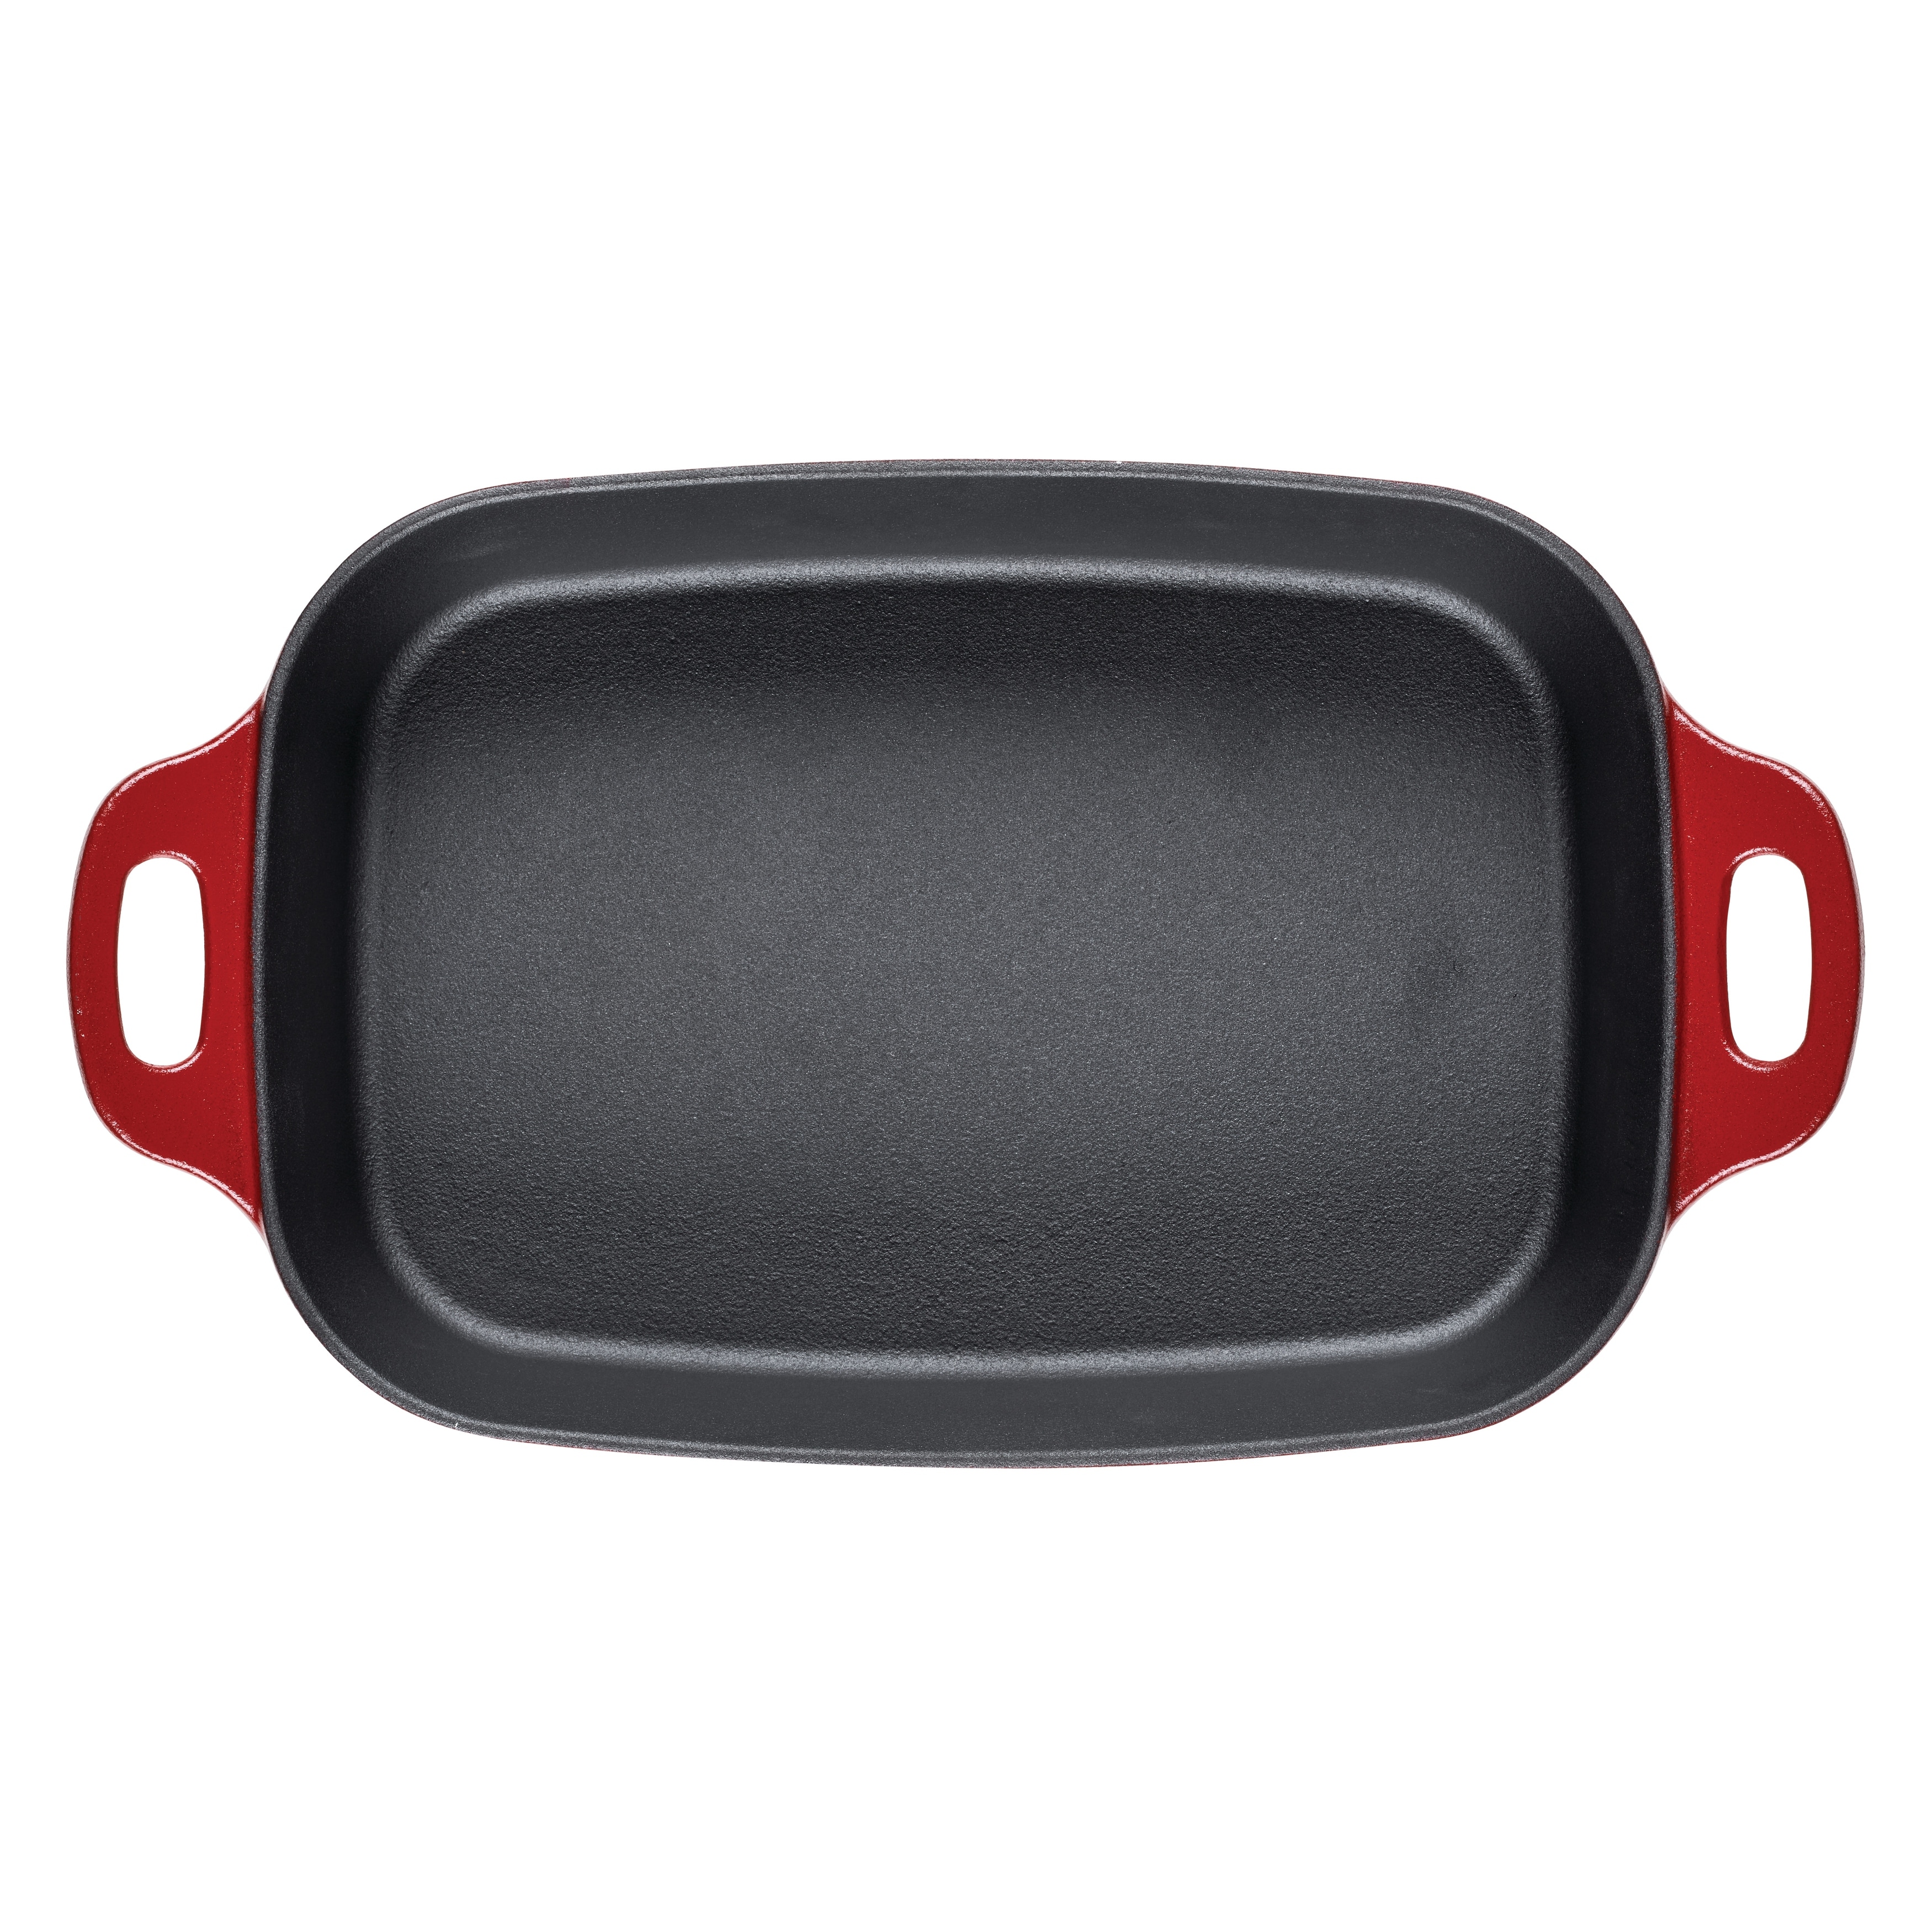 https://ak1.ostkcdn.com/images/products/is/images/direct/34eb62ecefda5541a6669878d52fdbf73e9ea9aa/Rachael-Ray-NITRO-Cast-Iron-Roasting-Pan%2C-9-Inch-x-13-Inch%2C-Agave-Blue.jpg